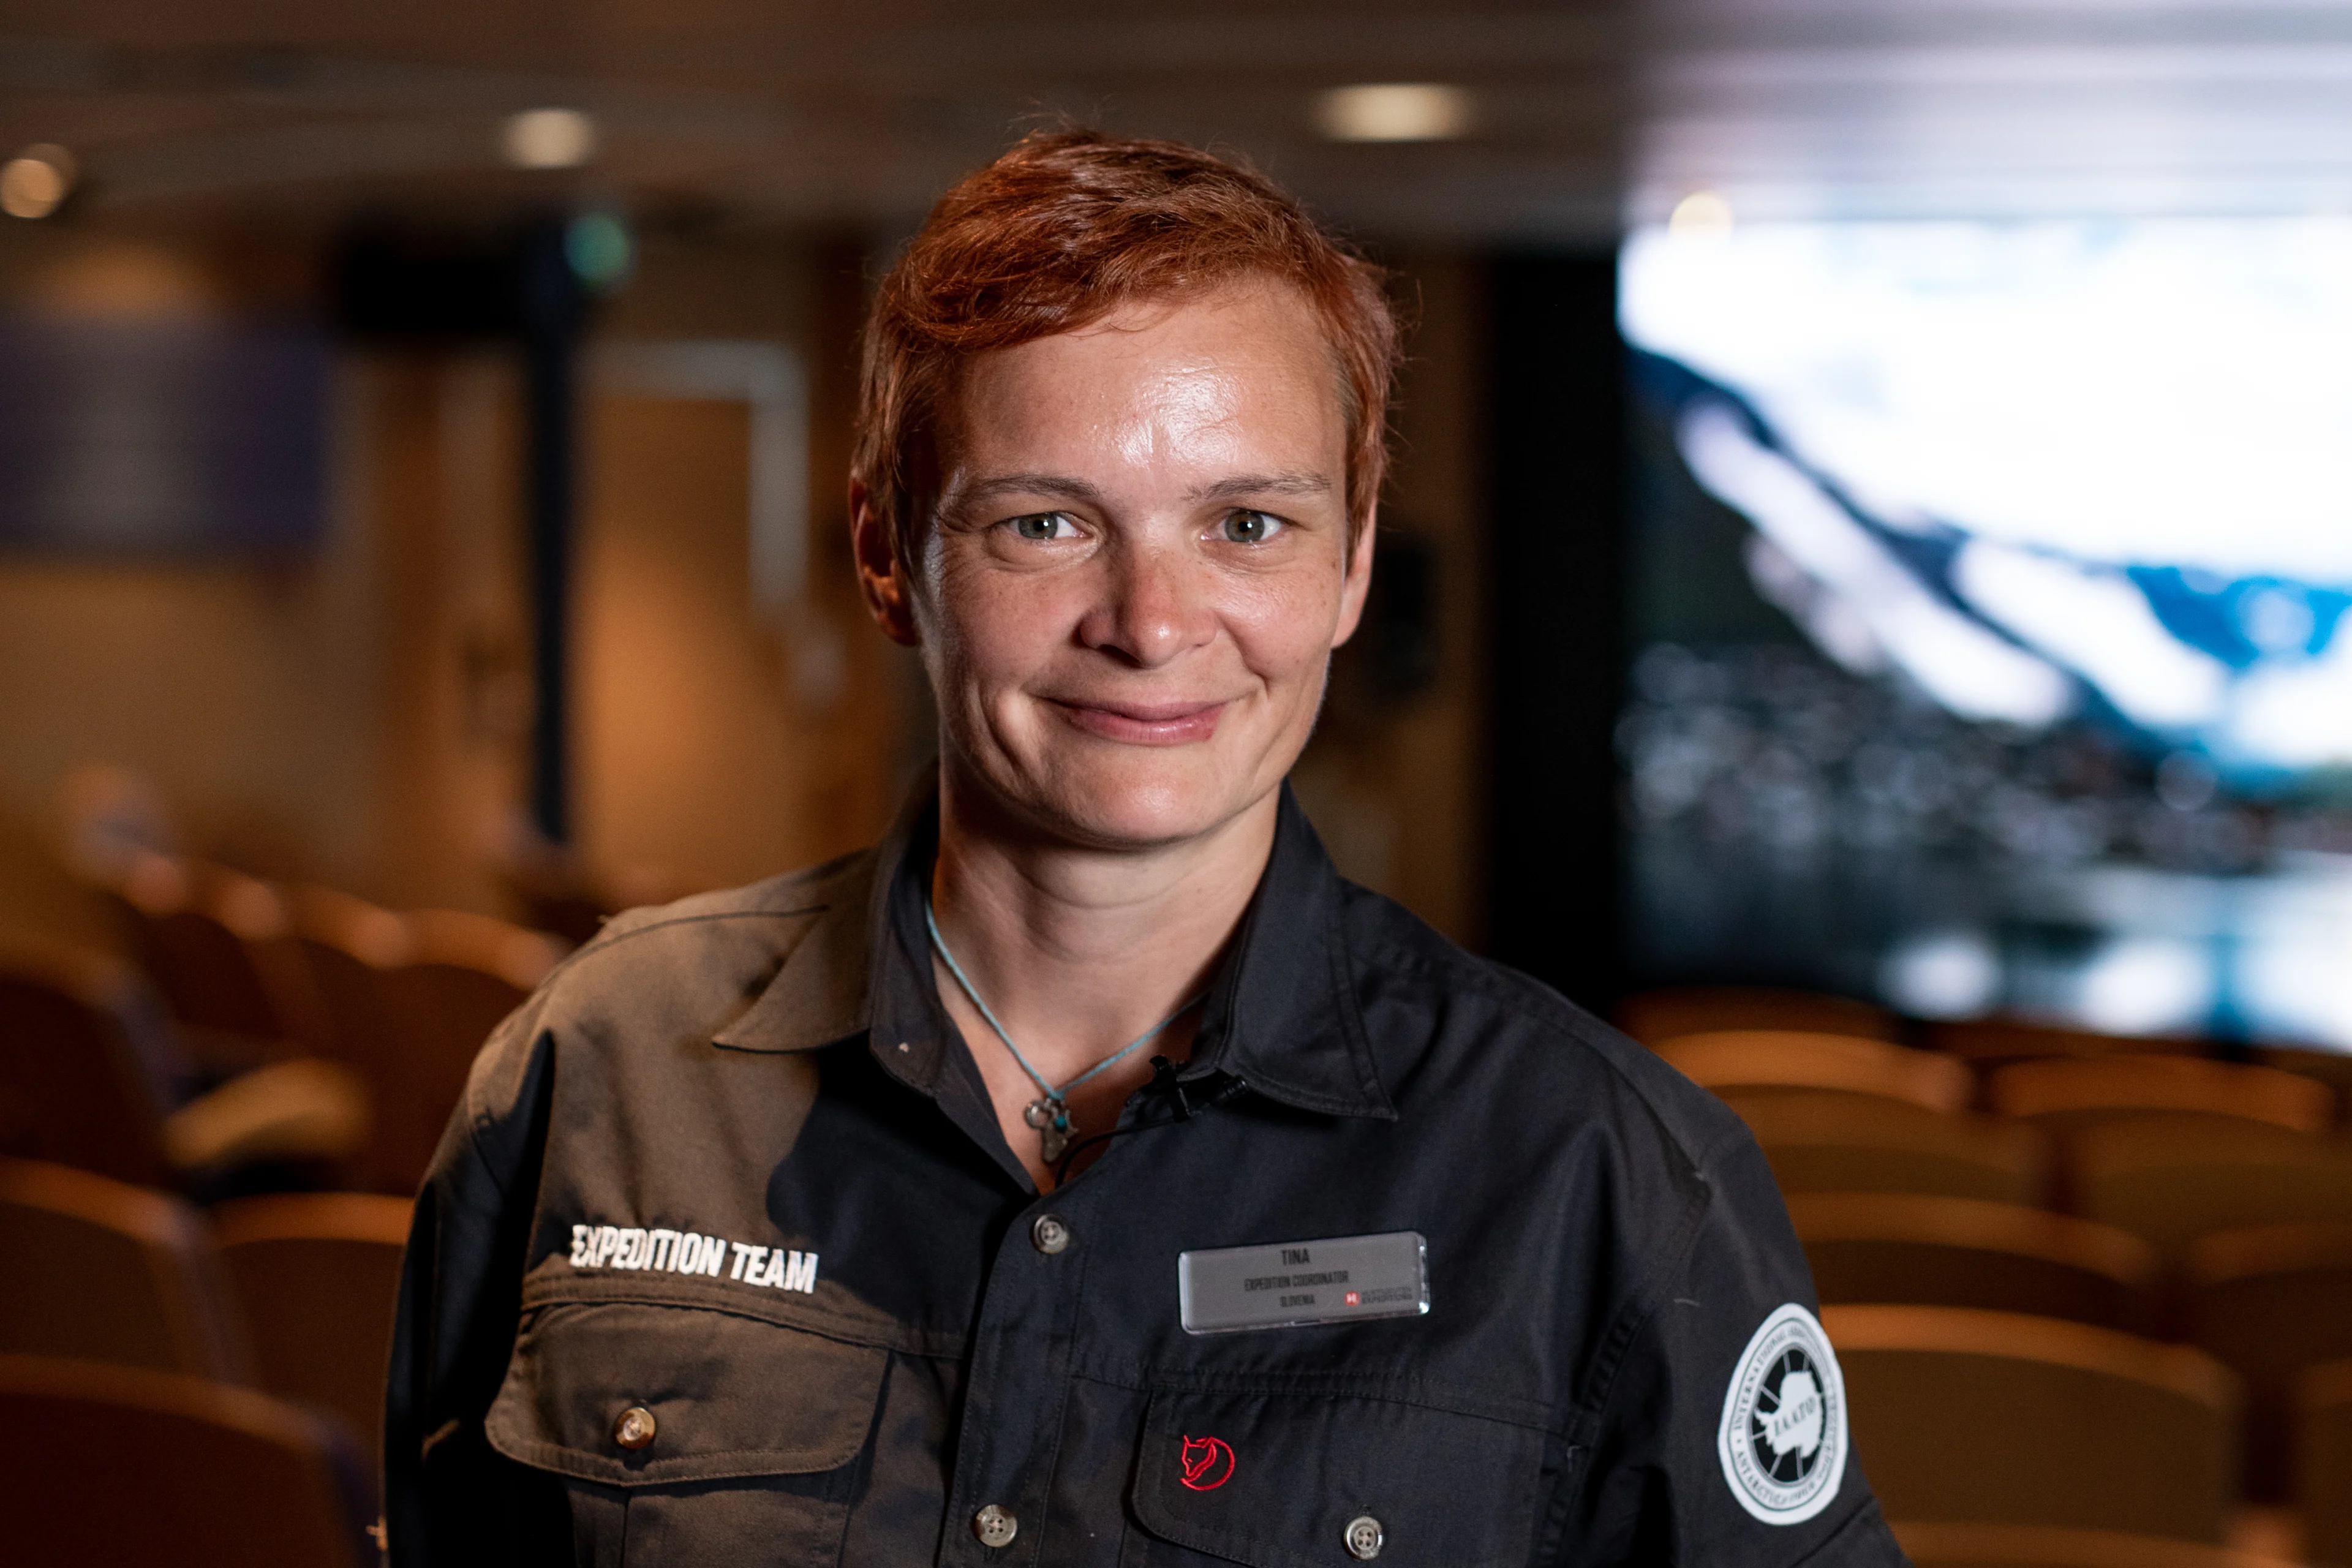 Tina Hudnik, Expedition Coordinator with the Expedition Team onboard MS Maud. Photo: Tom Woodstock / Ultrasharp